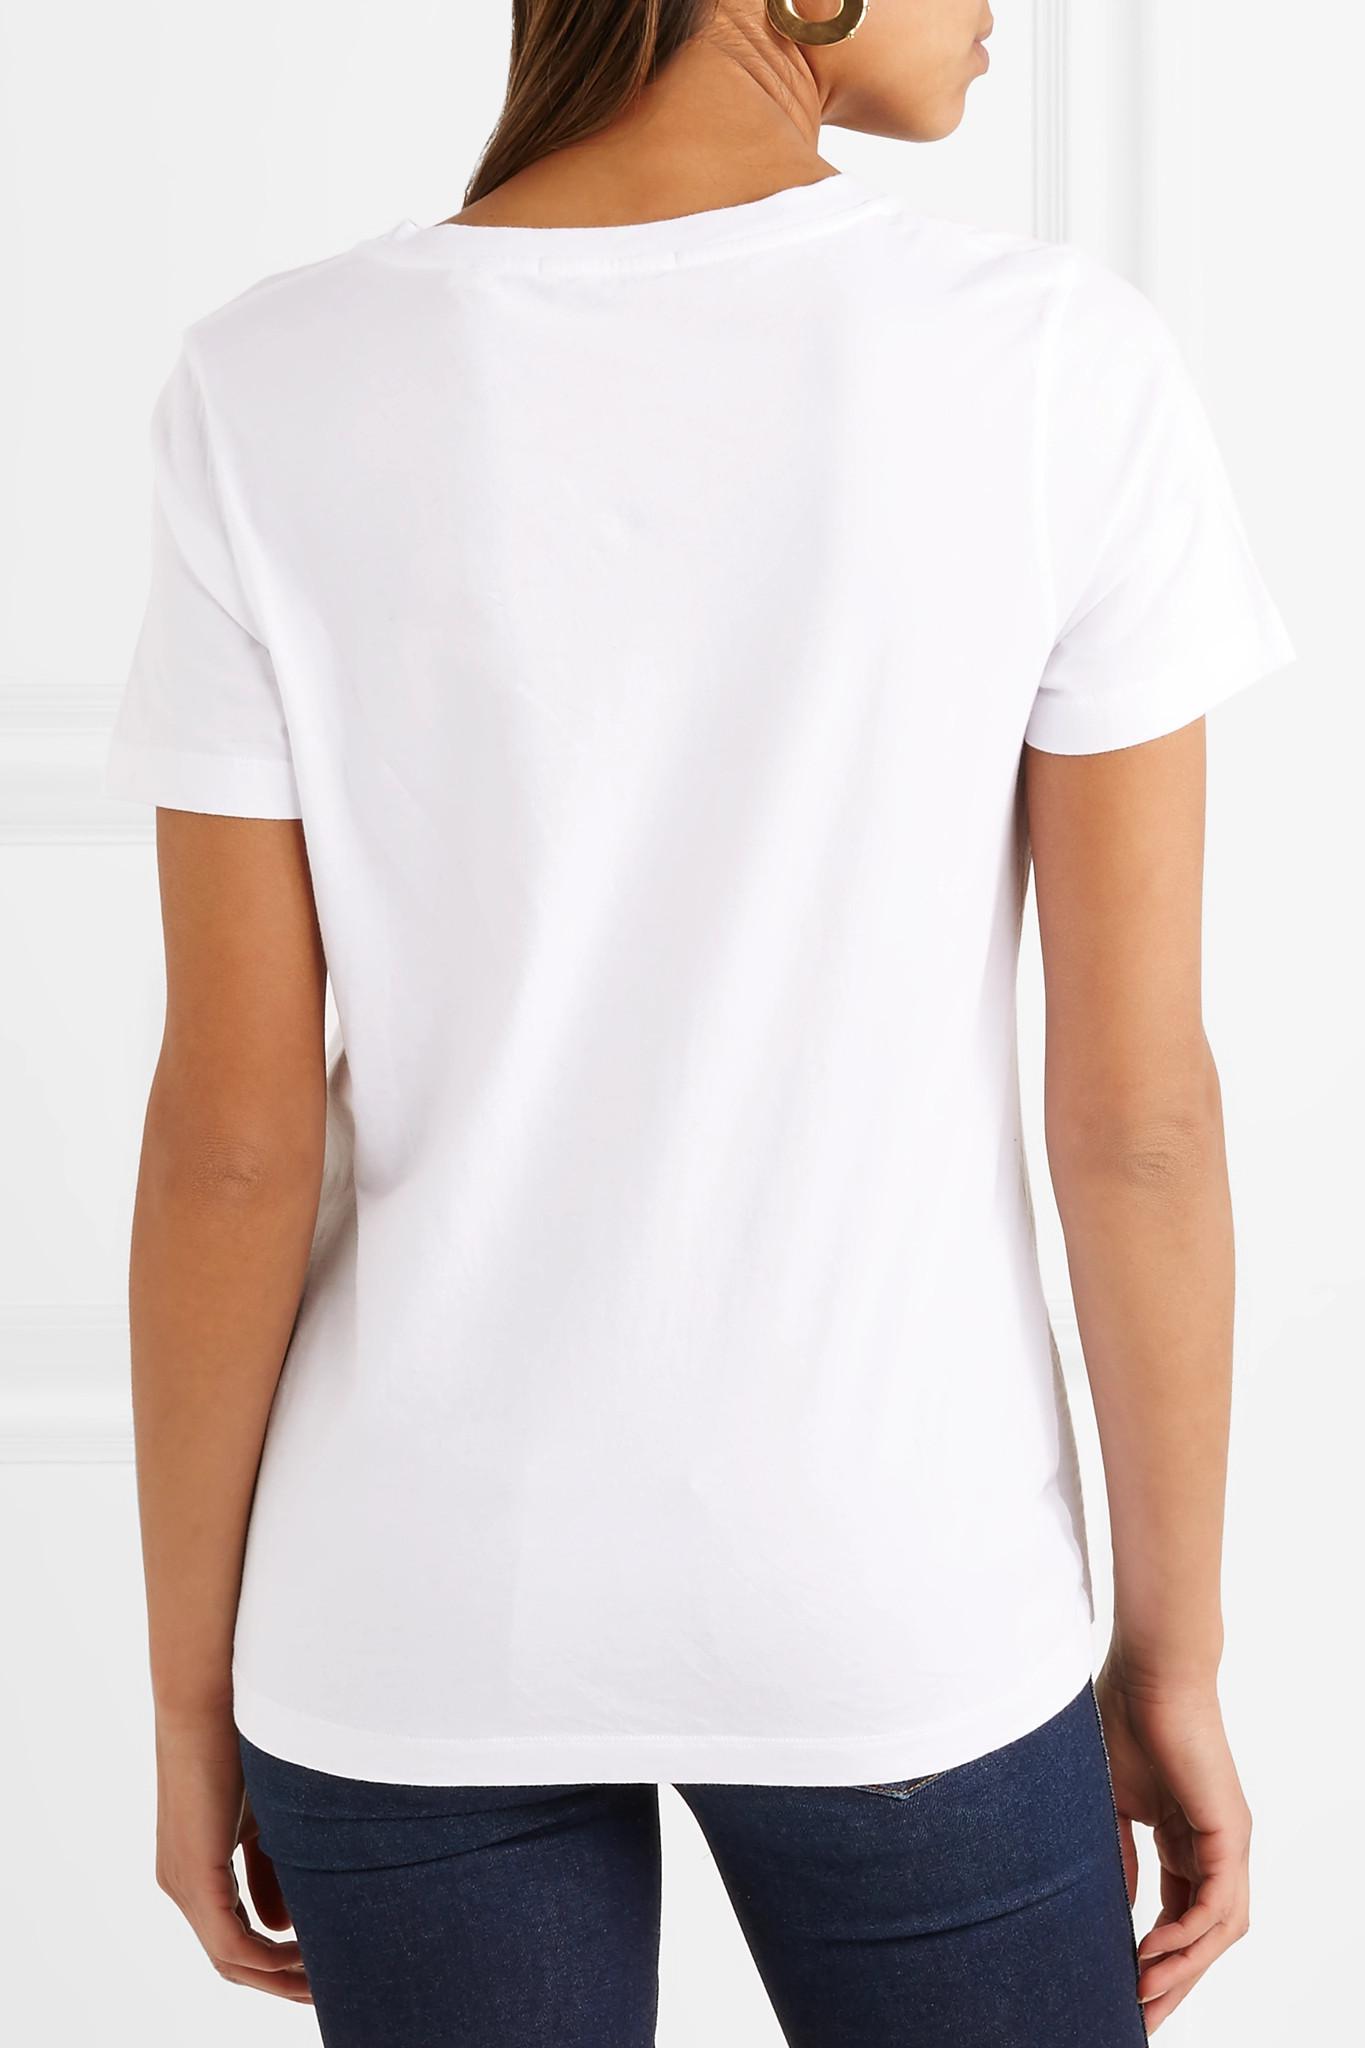 Chinti & Parker Peut Etre Embroidered Cotton-jersey T-shirt in White | Lyst